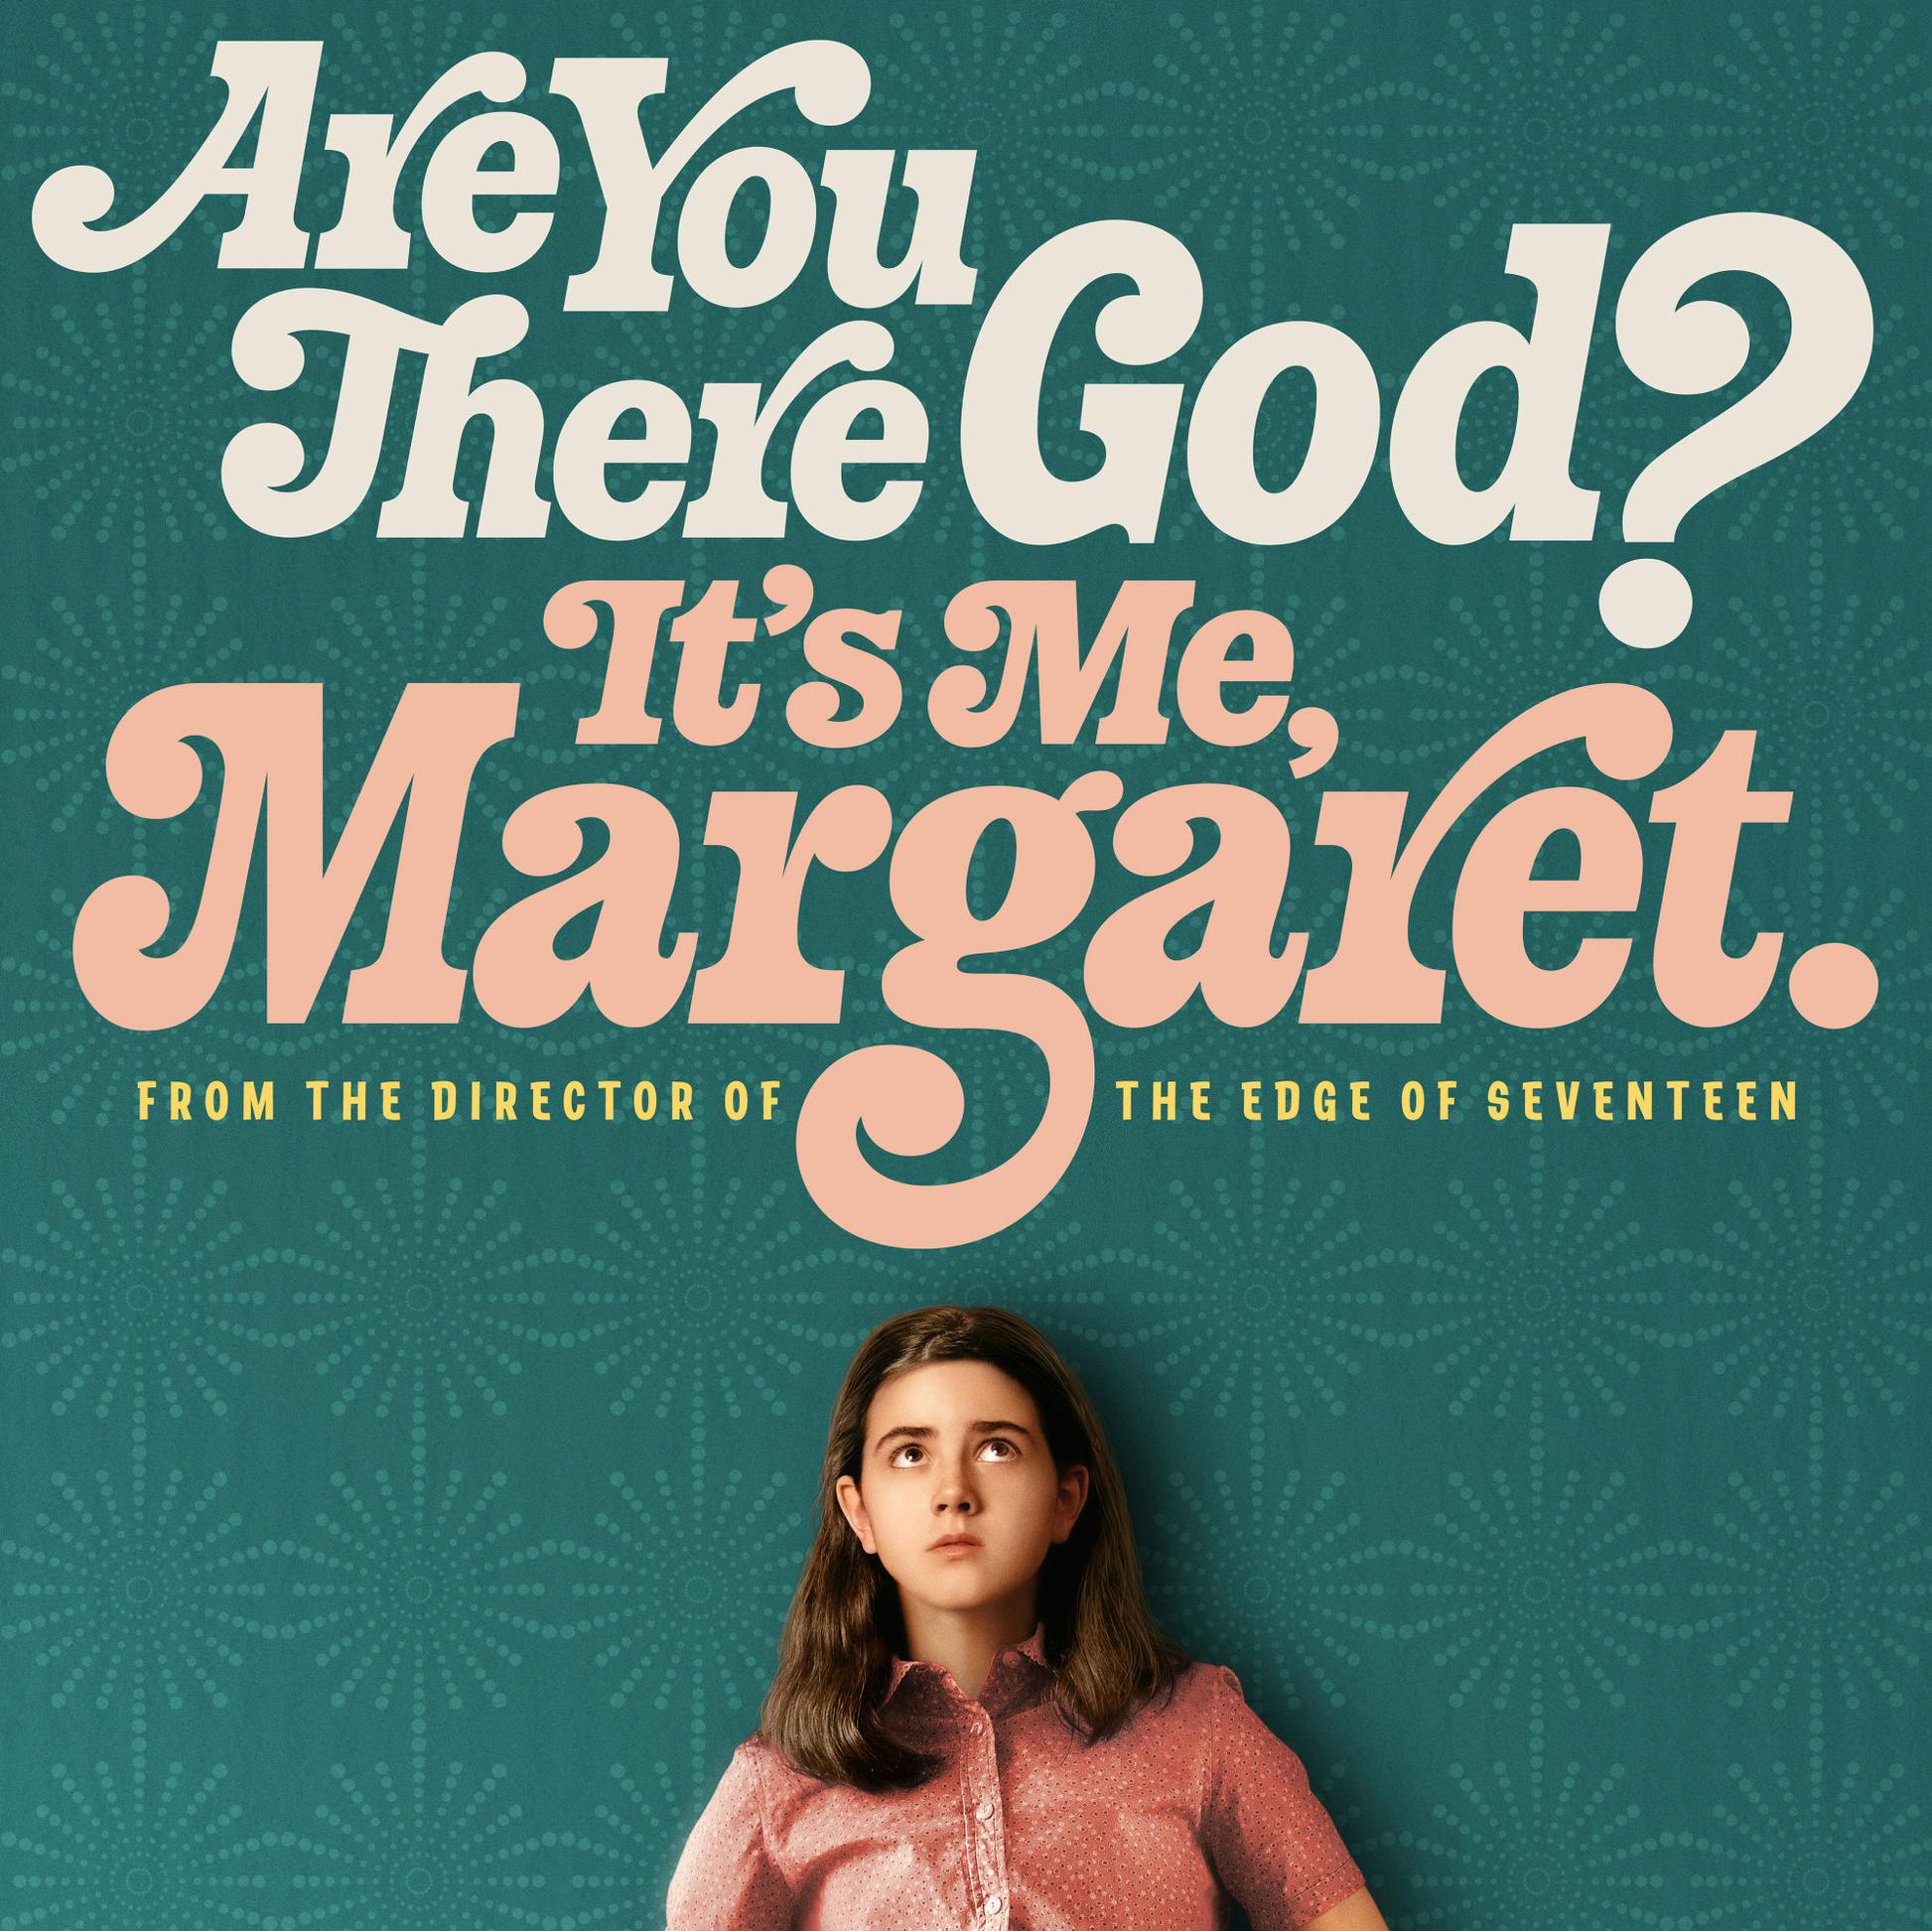 Ep 275 - Are You There God? It’s Me, Margaret.